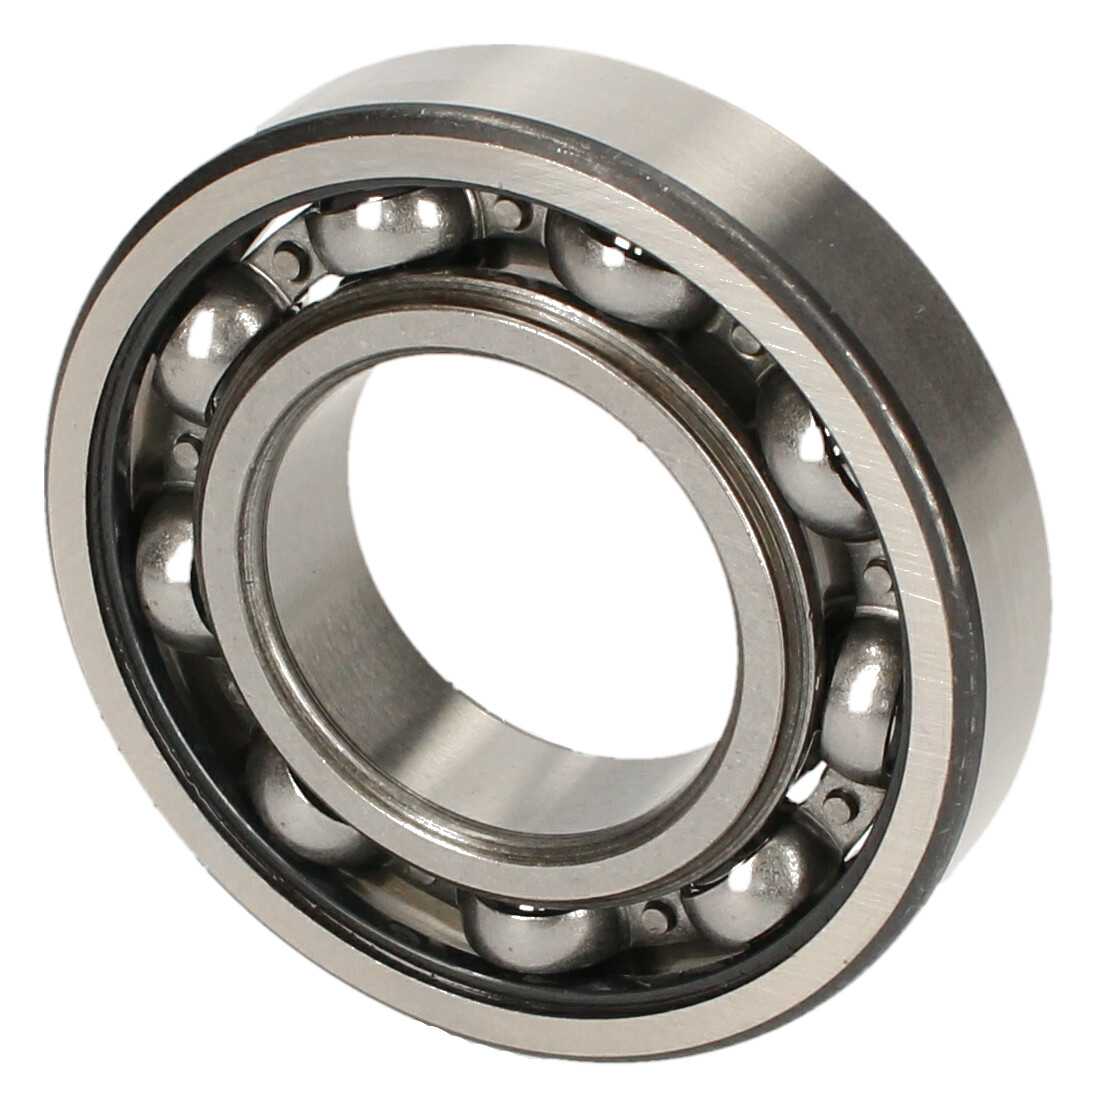 BALL BEARING 6208 SNR (WITHOUT PACKAGING) - Image 1